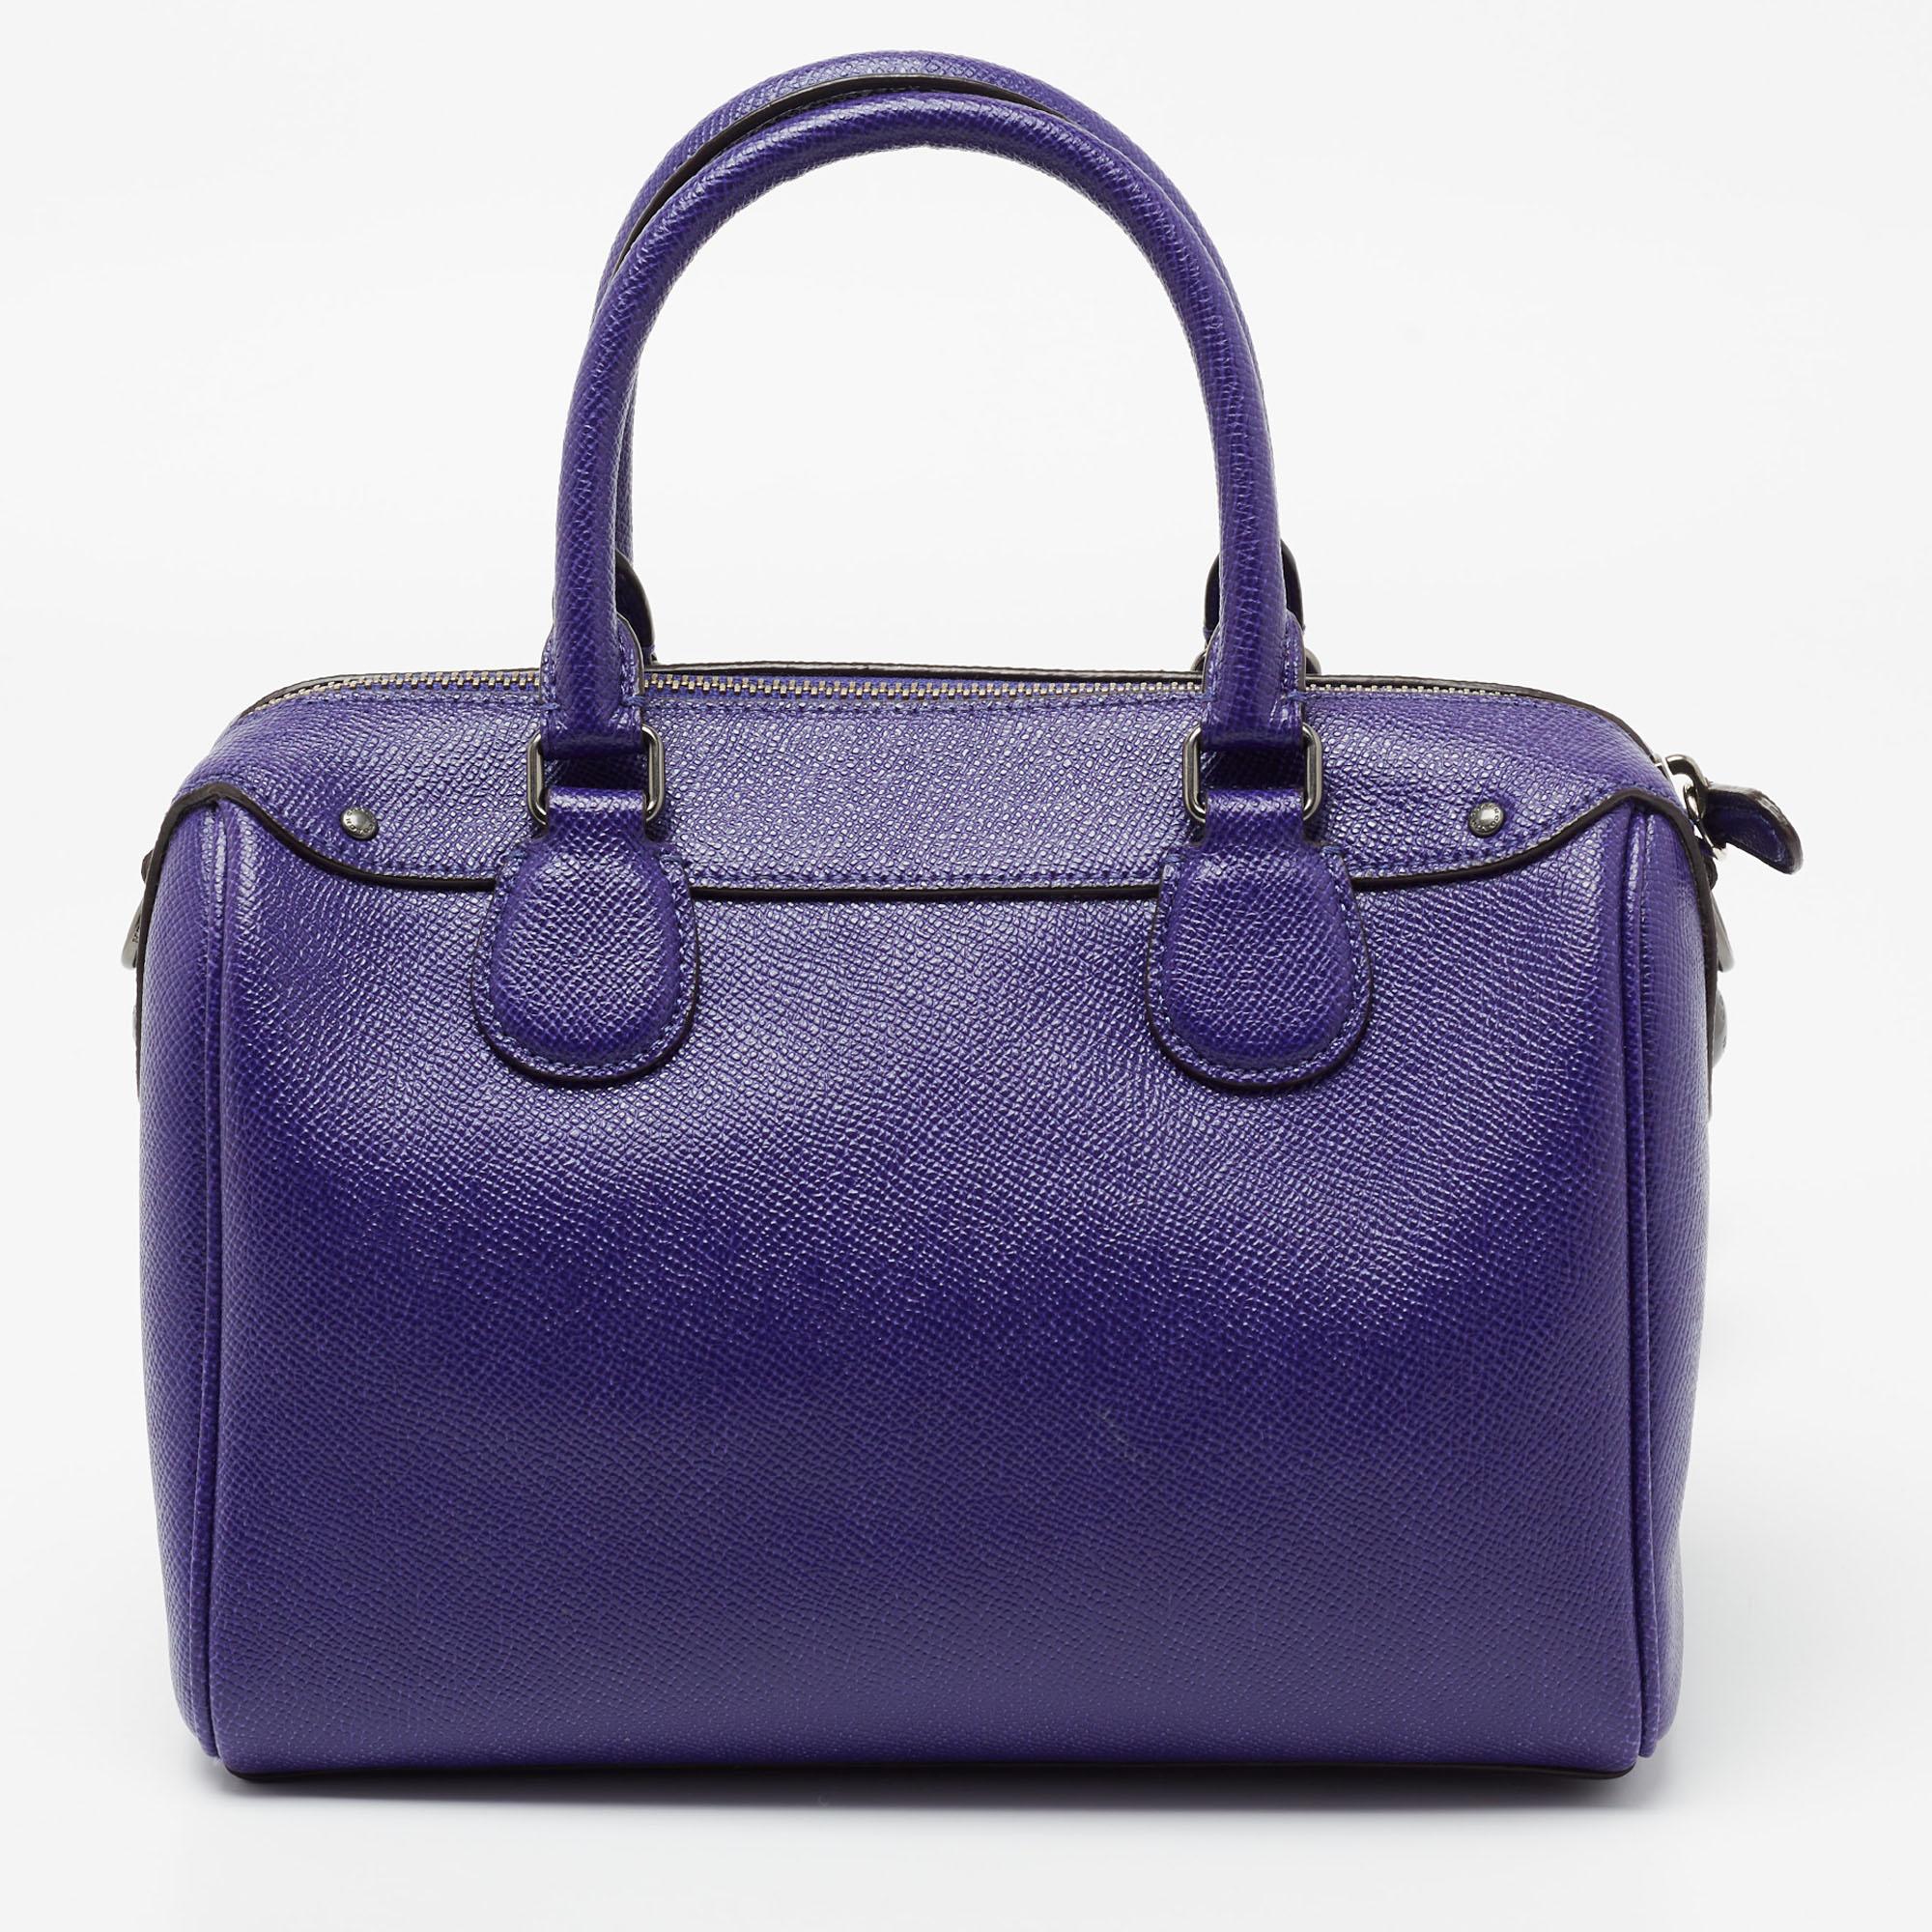 To make you always be in style whenever you step out, Coach offers you this stunner of a bag. Crafted from purple-hued leather, the bag features dual handles, a removable shoulder strap, and a brand leather tag. The top zip closure opens to a